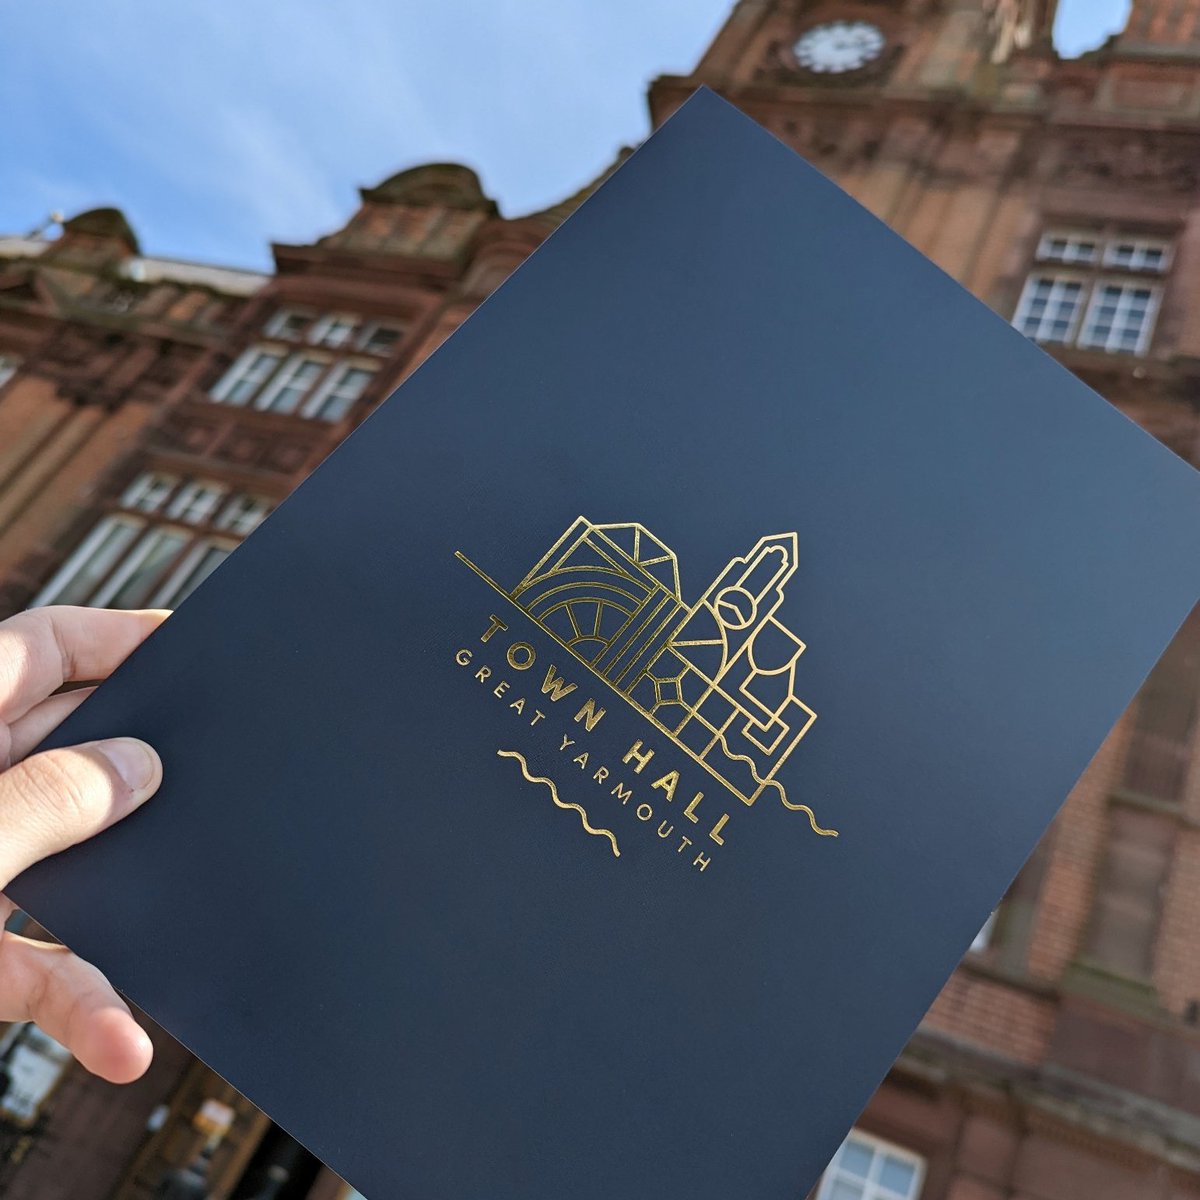 Just look at our shiny new presentation folder, packed full of brochure information about weddings at the #TownHall, #GreatYarmouth. 🤩

Pop in & collect yours! #TownHallWeddings #GreatYarmouthWeddings #GreatYarmouthWeddingVenue #NorfolkWeddingVenue #2022weddings #2023weddings